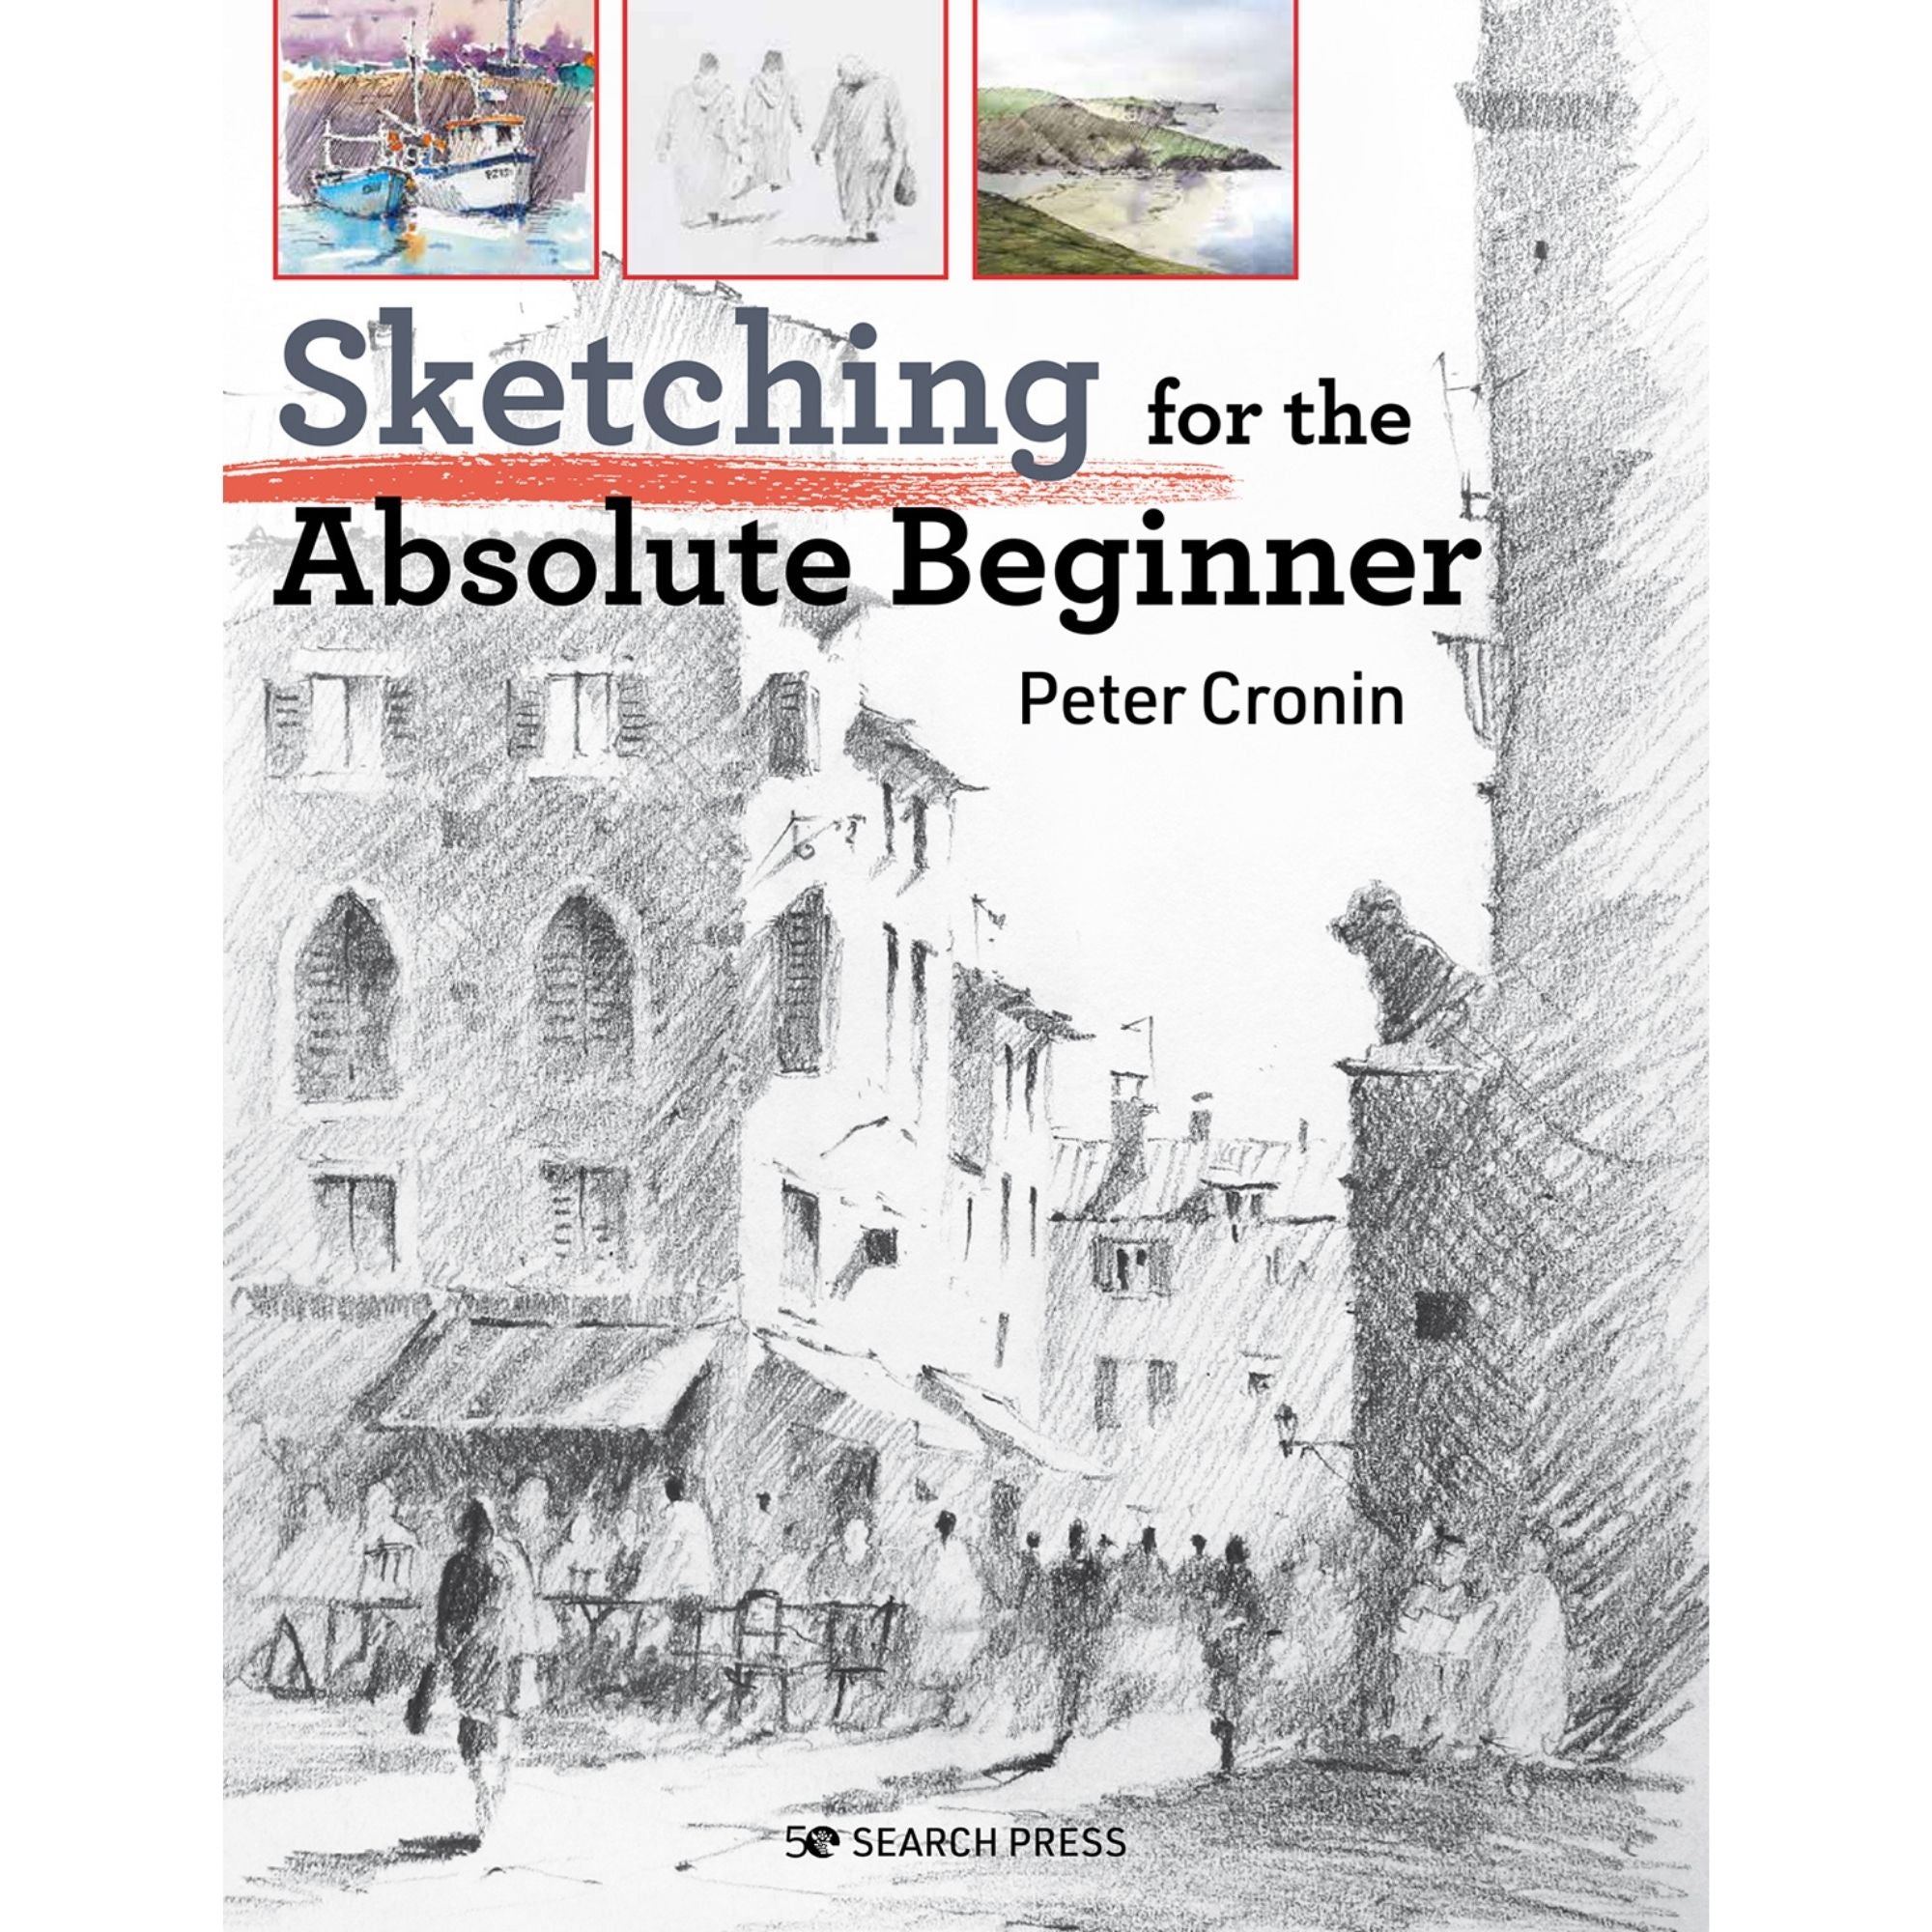 Sketching for the Absolute Beginner - P. Cronin